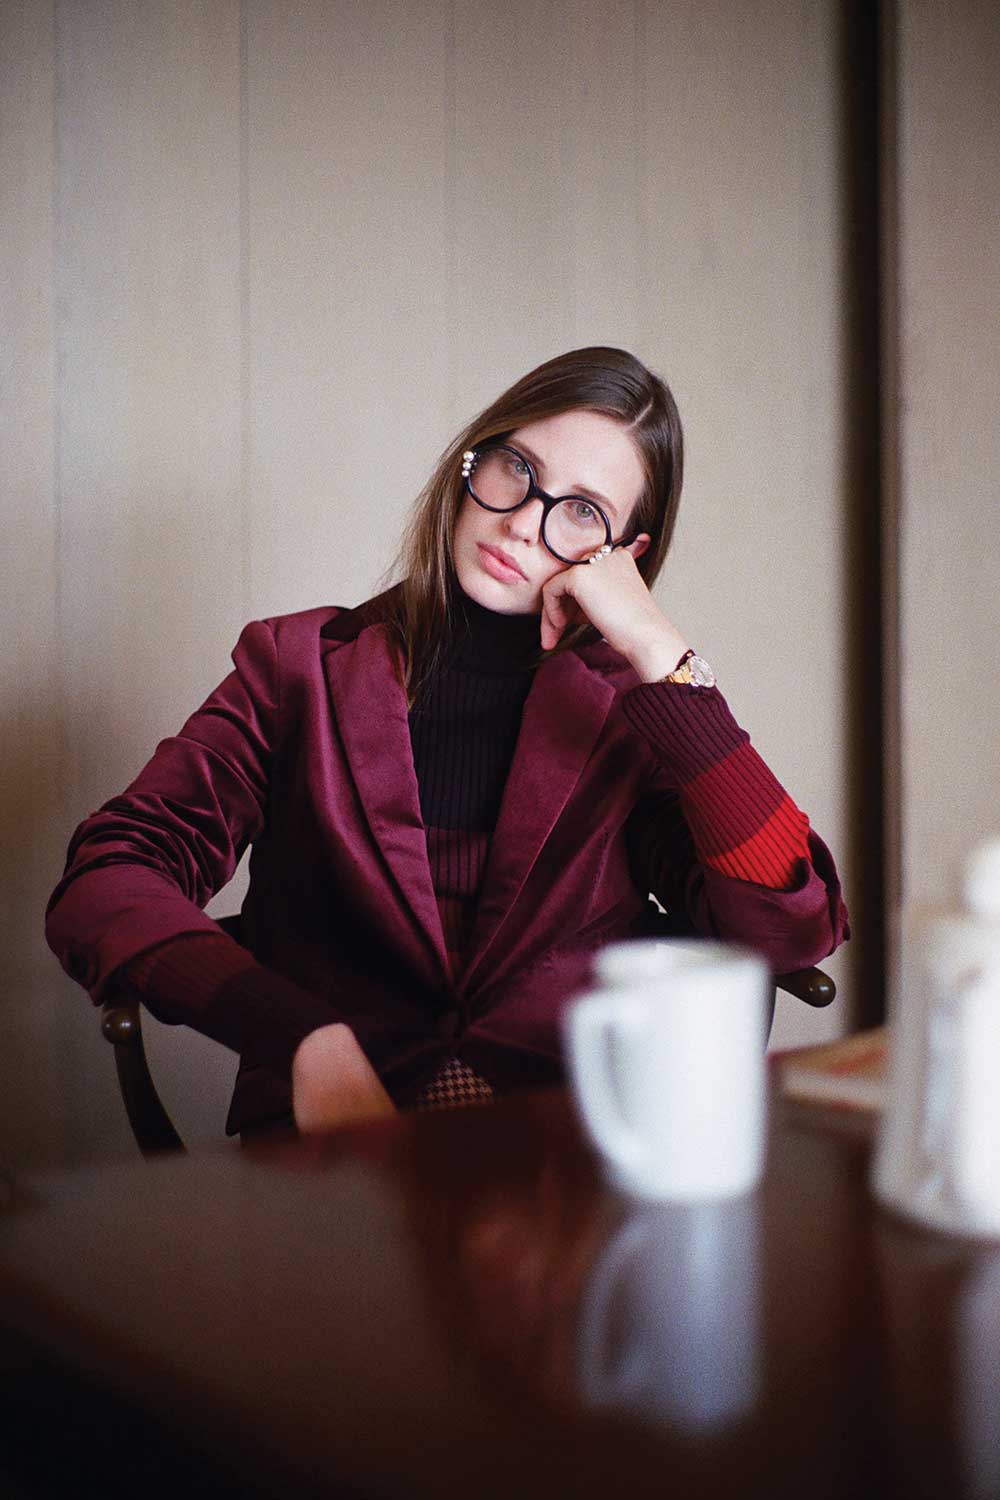 Woman in maroon velvet blazer with round glasses on, coffee in foreground on table